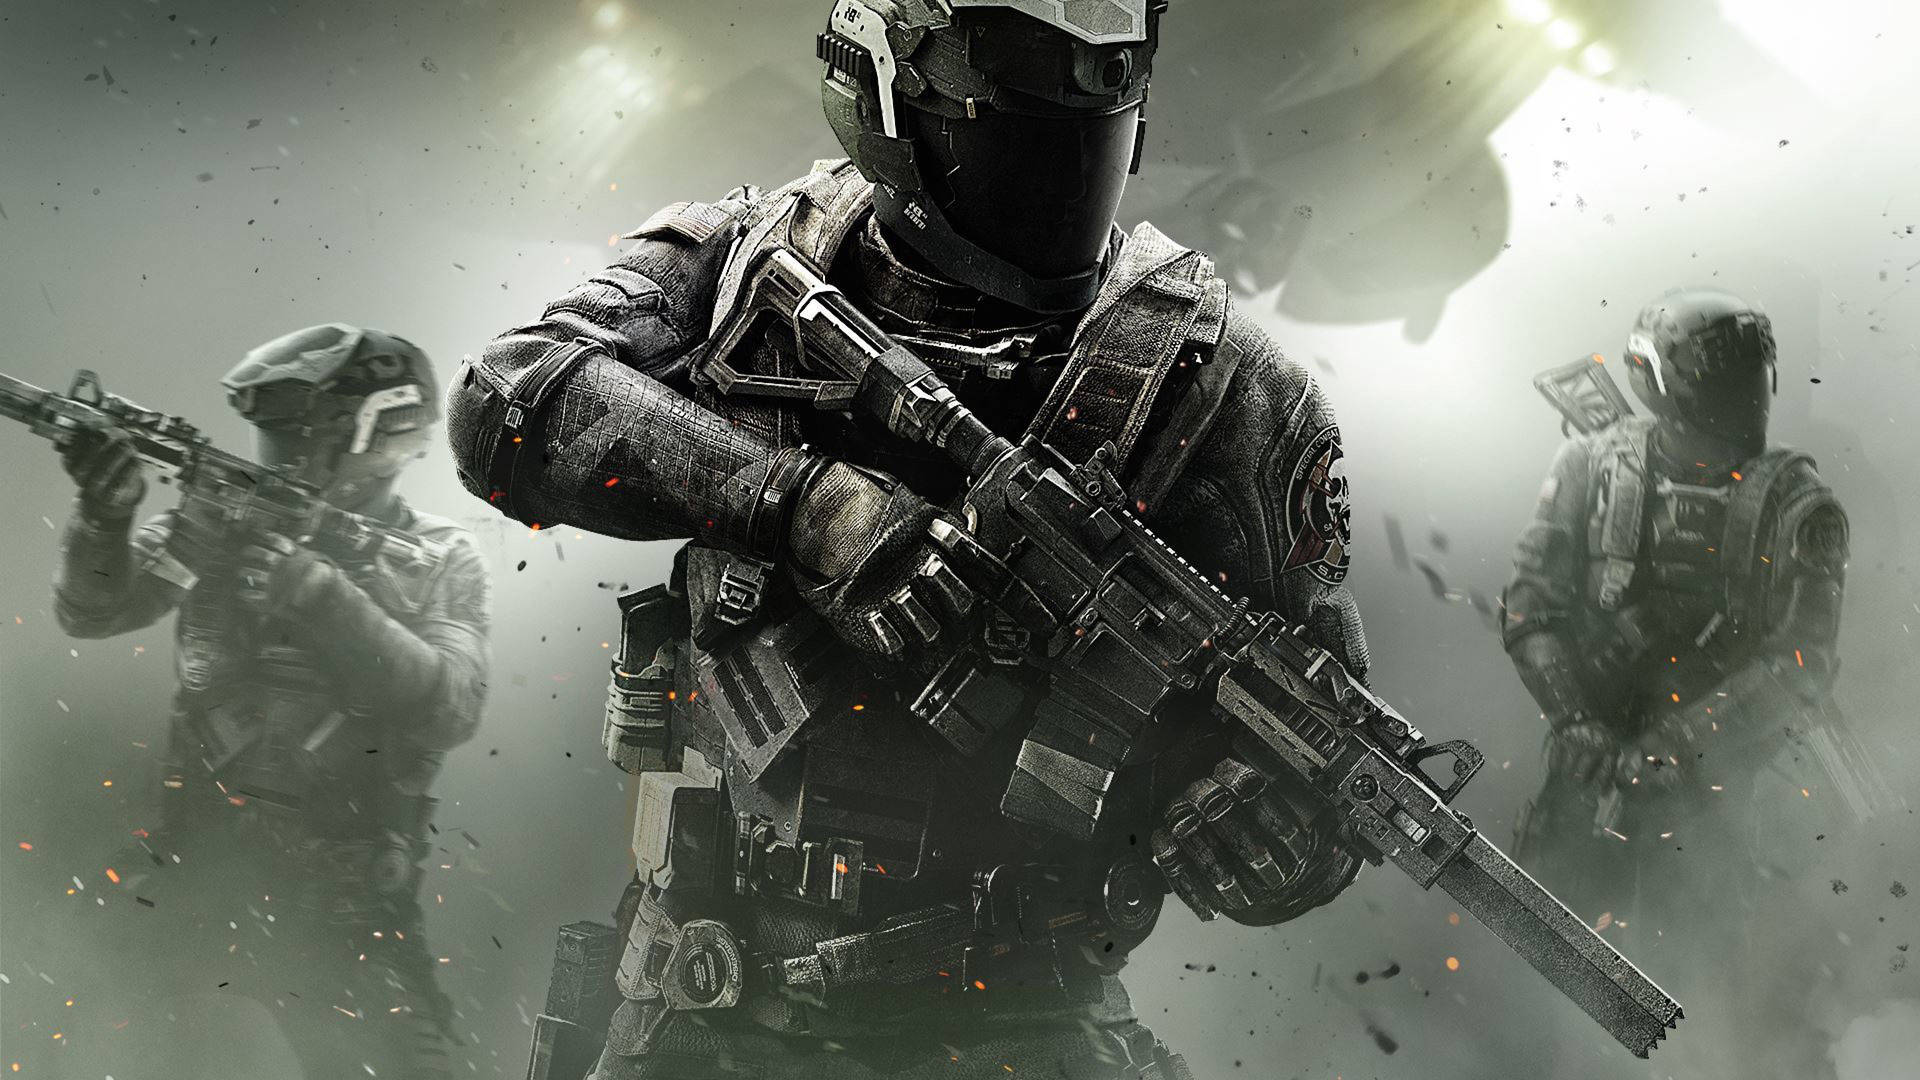 Cut the competition down to size with the advanced suit soldiers of Call of Duty. Wallpaper